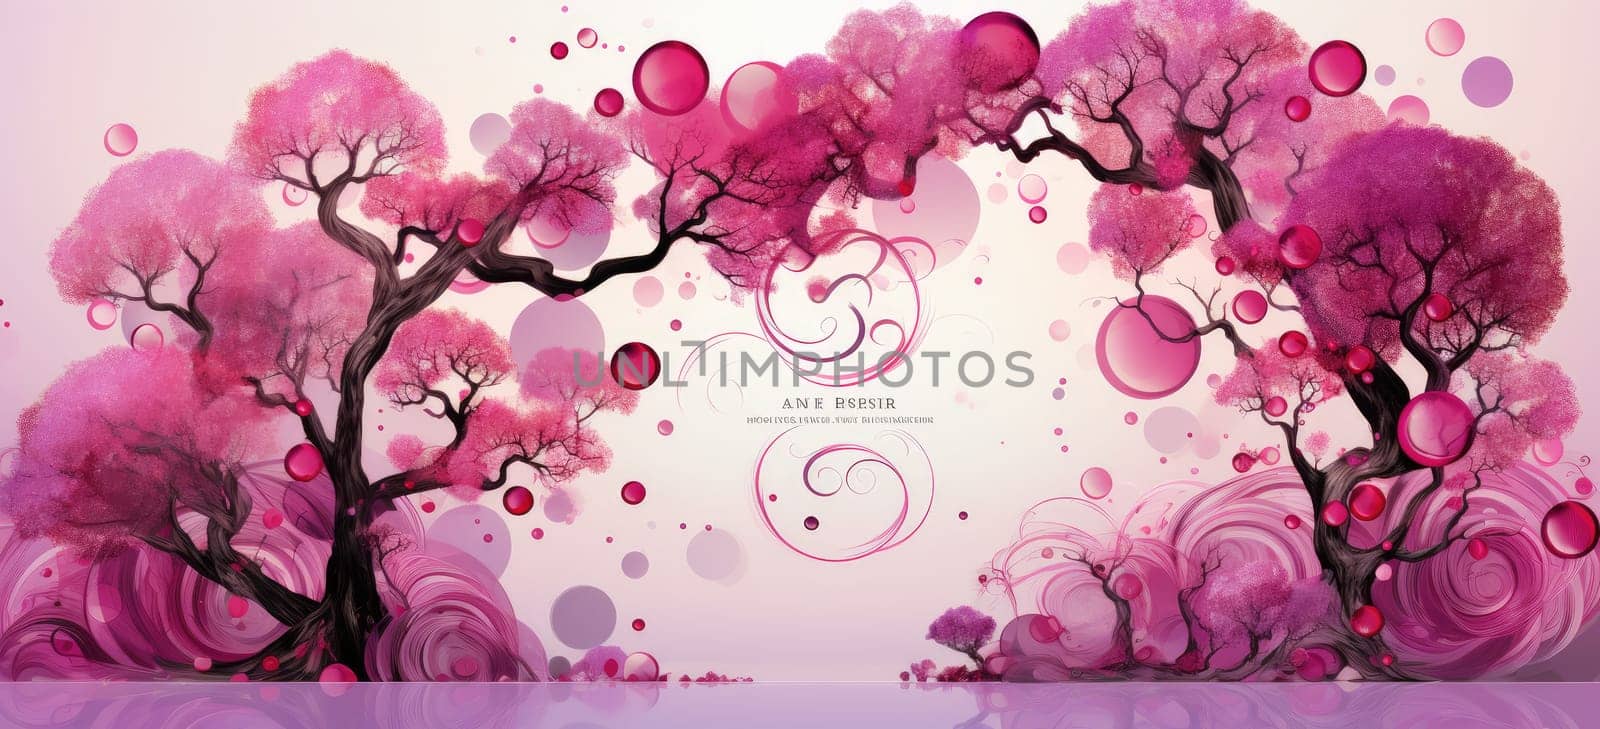 Family Tree on Postcard: Purple and Pink Collage with Oval Circles for Inserting Photos by Yurich32